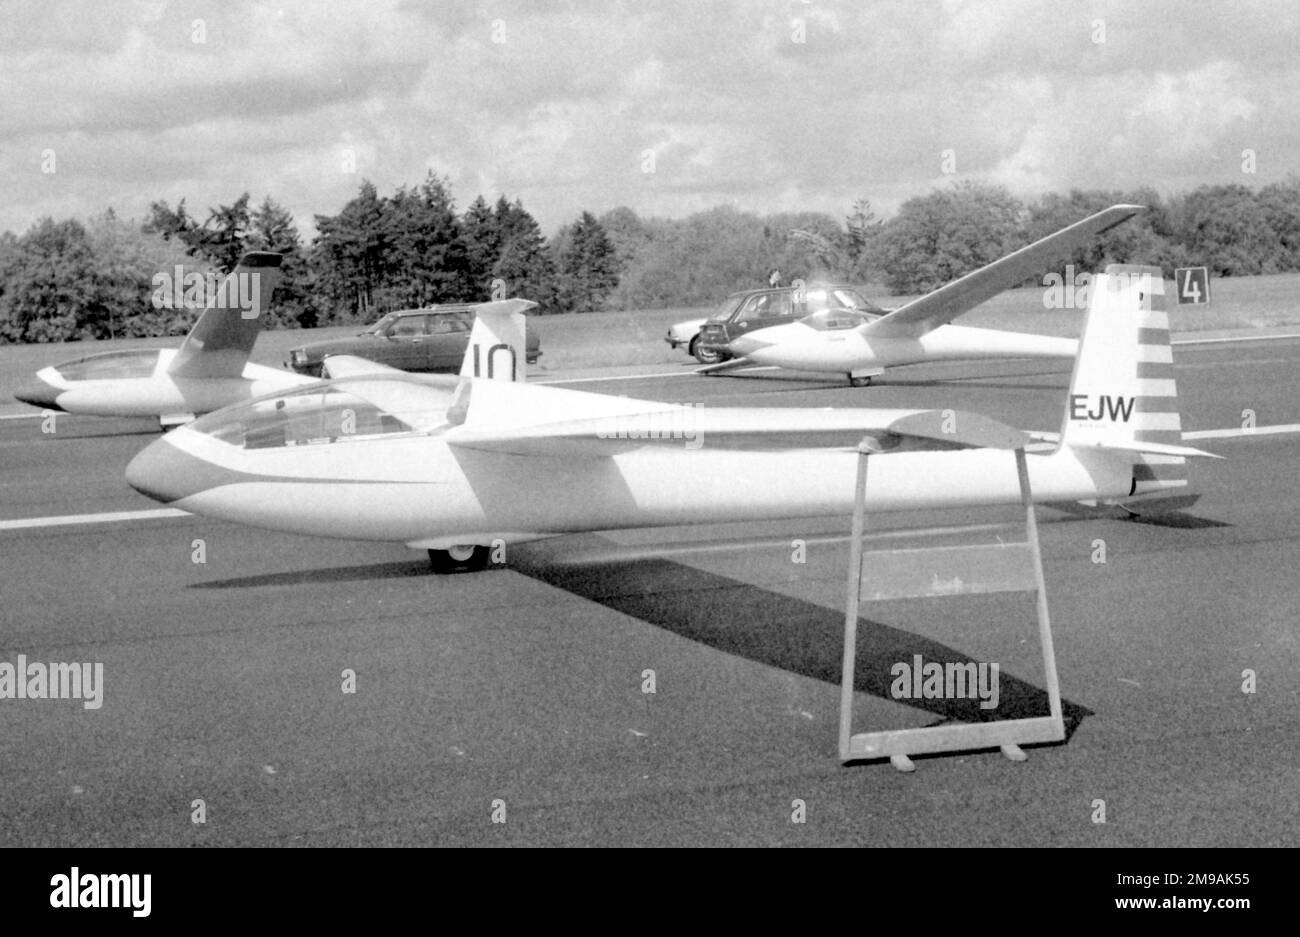 Issoire D7 Iris EJW, on the grid at a gliding competition at Lasham airfield, Alton, Hampshire. Stock Photo